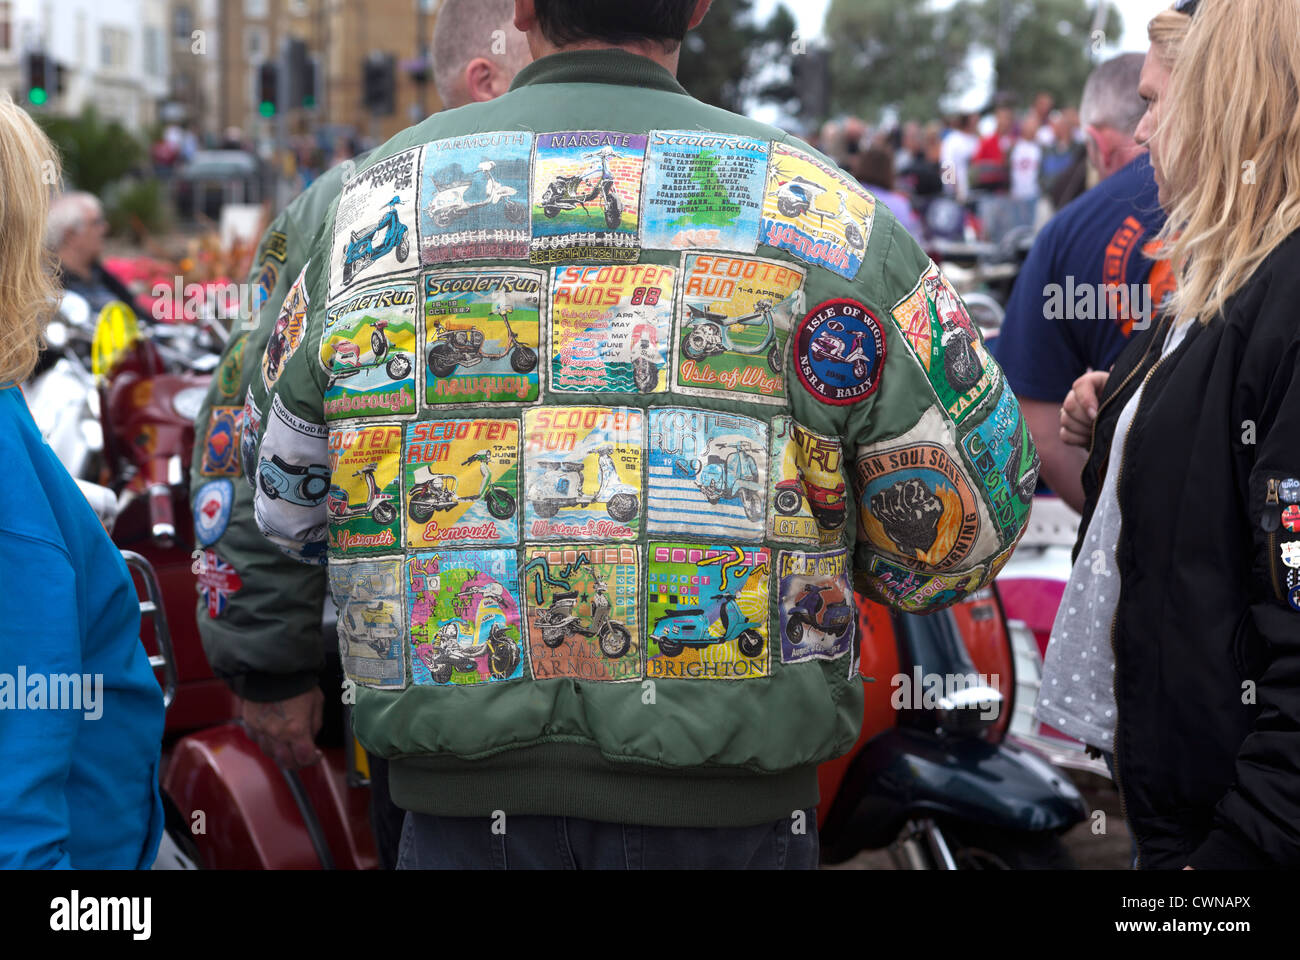 Jacket with Souvenir Rally Patches at the International Scooter Rally Isle  of Wight England UK Stock Photo - Alamy